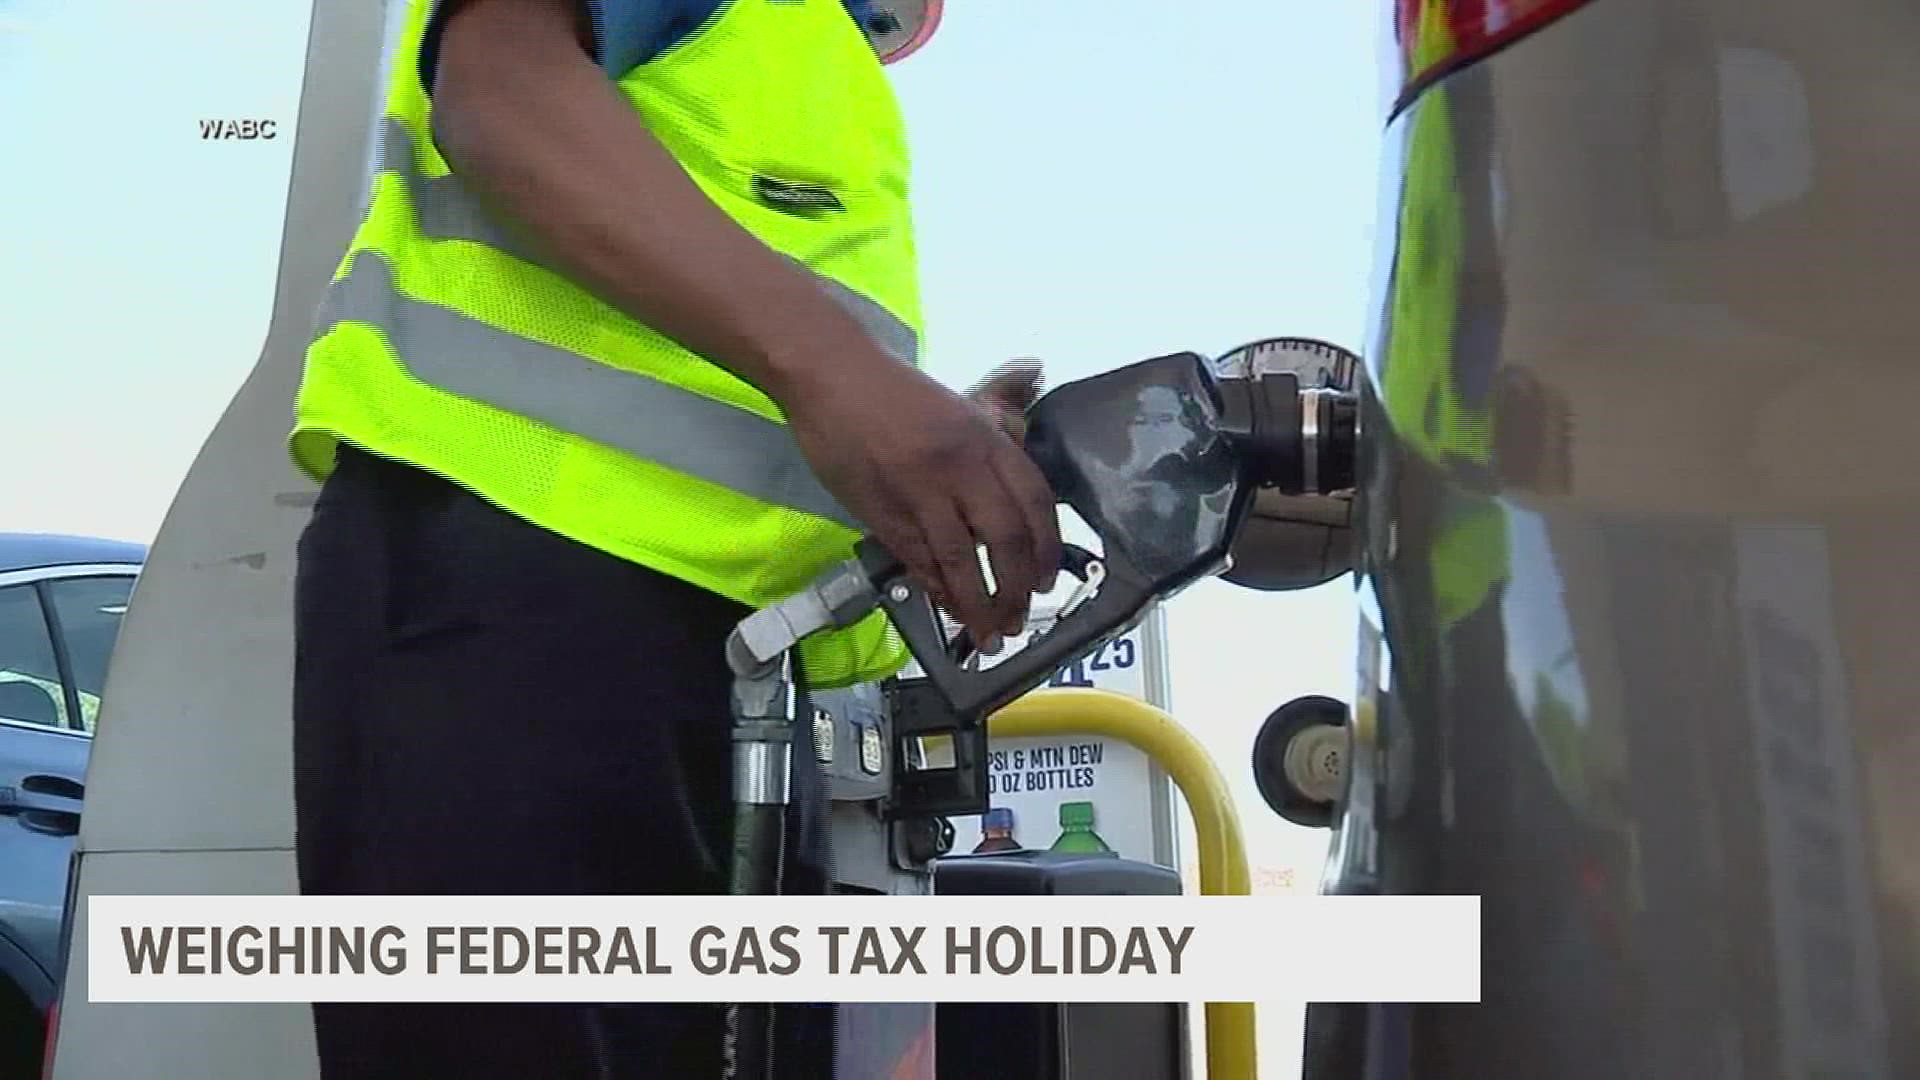 The idea, which would have to receive congressional approval, would suspend the federal gas tax and save consumers about 18 cents per gallon of regular gas.